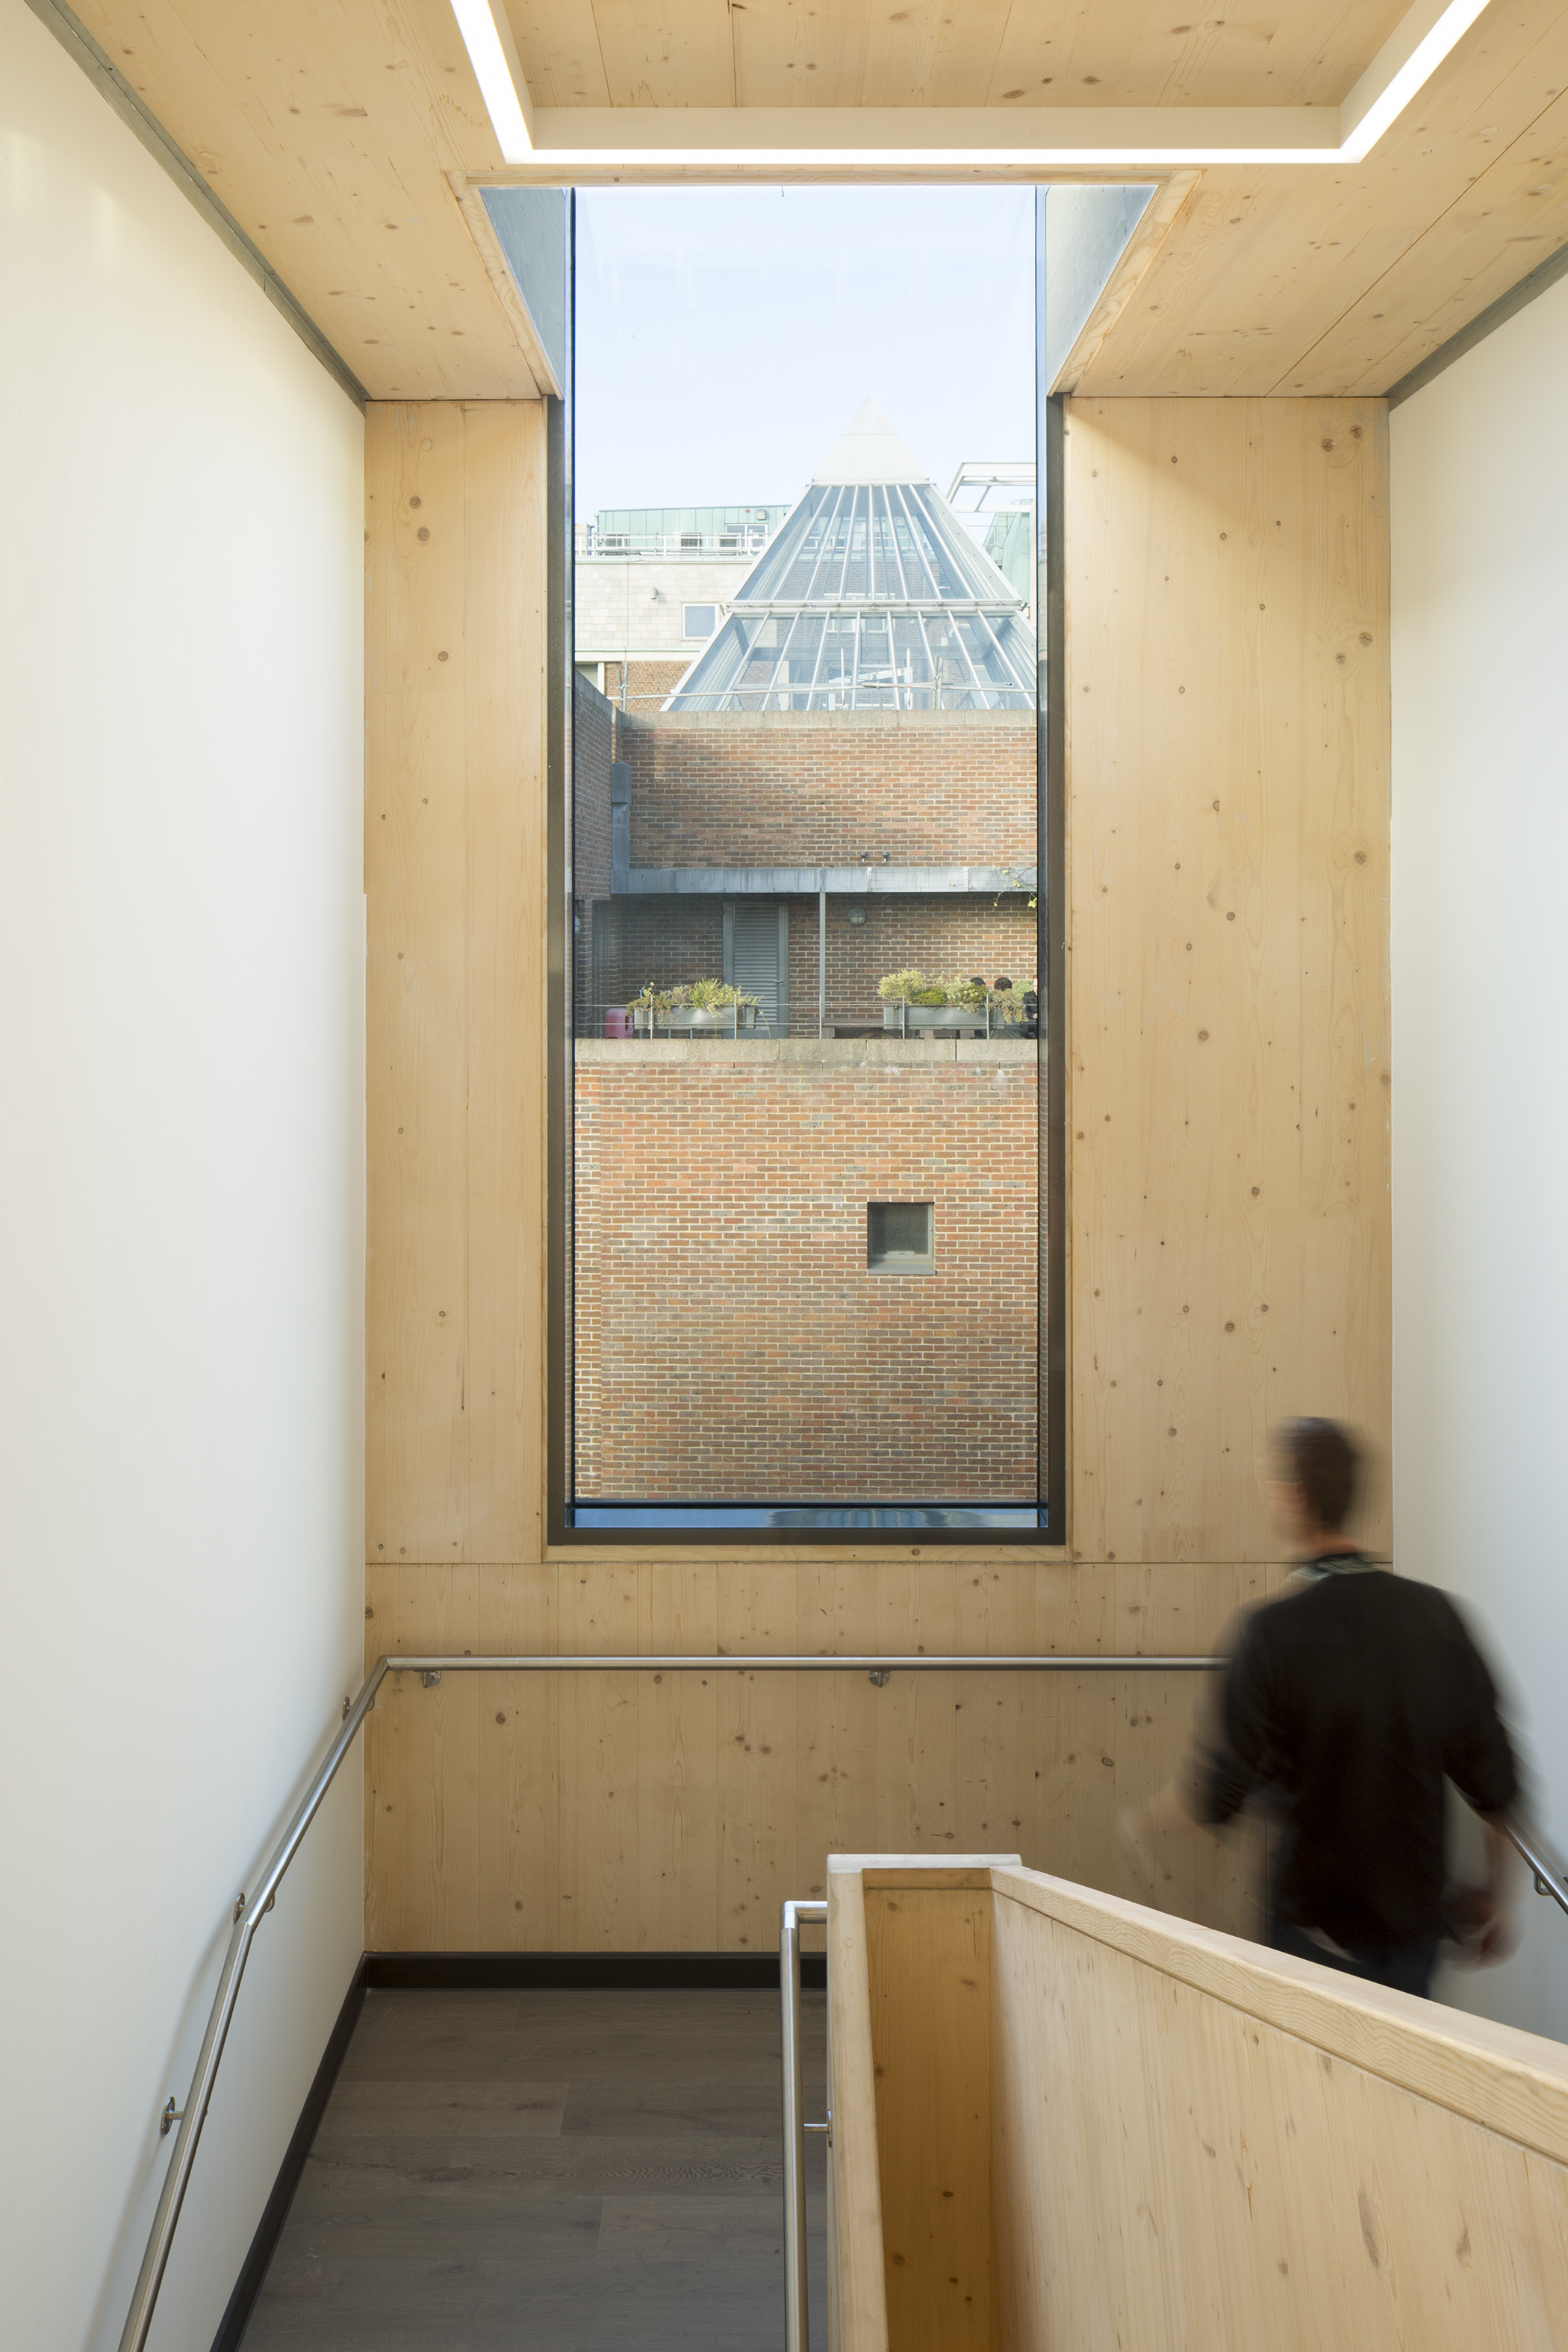 Interior view showing stairs and window with passing sports learning school student. | CDC Studio Cambridge architects